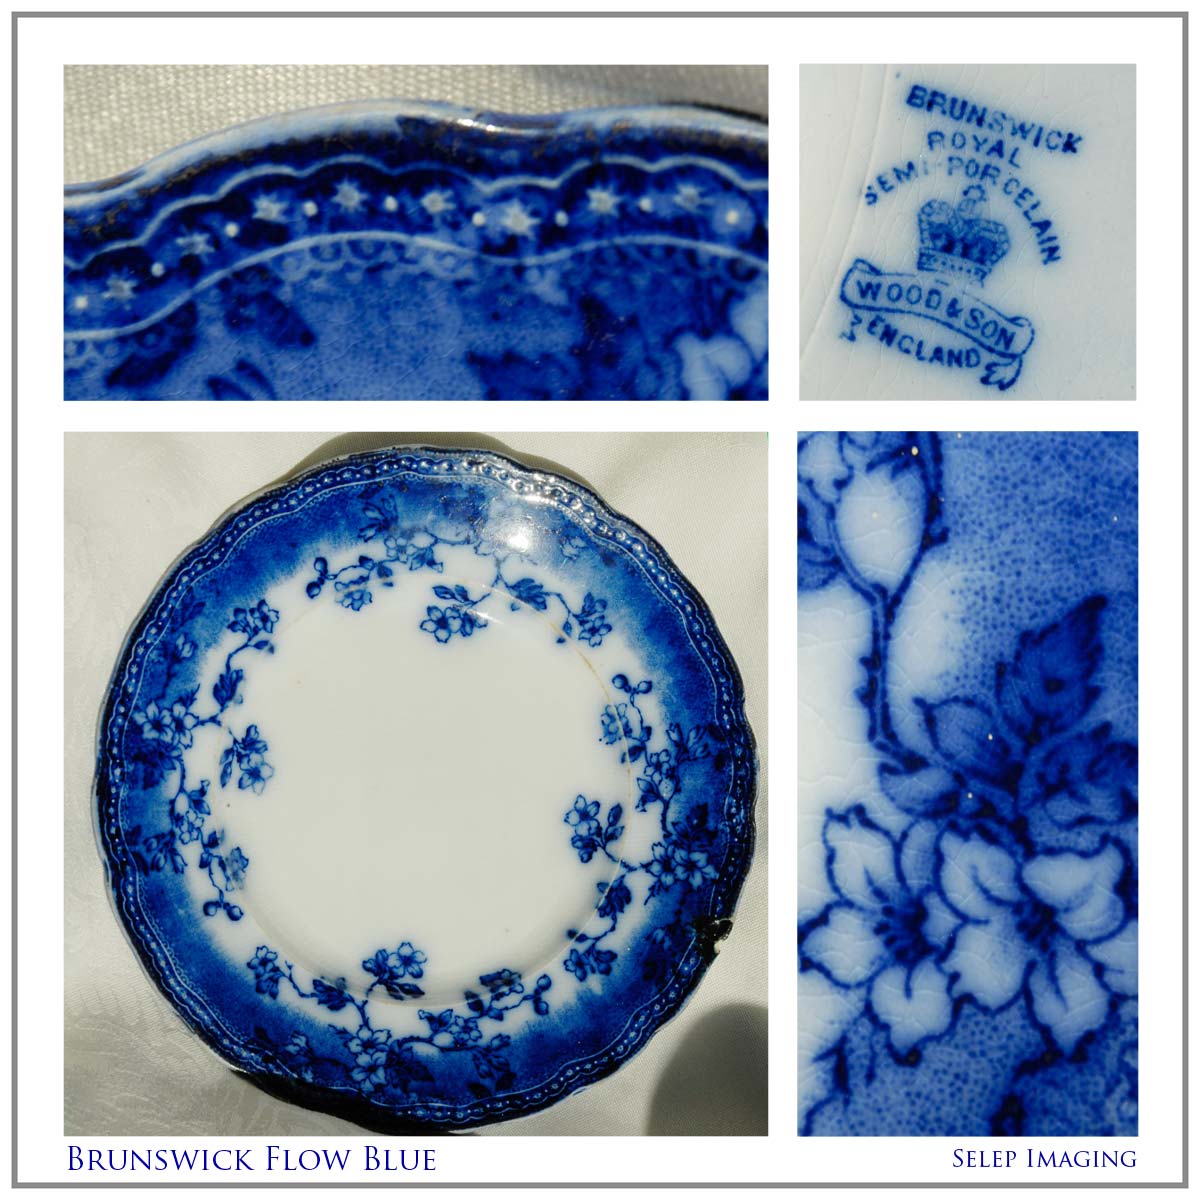 Flow Blue China plate Brunswick Wood and Son England Mark by Jeanne Selep Imaging